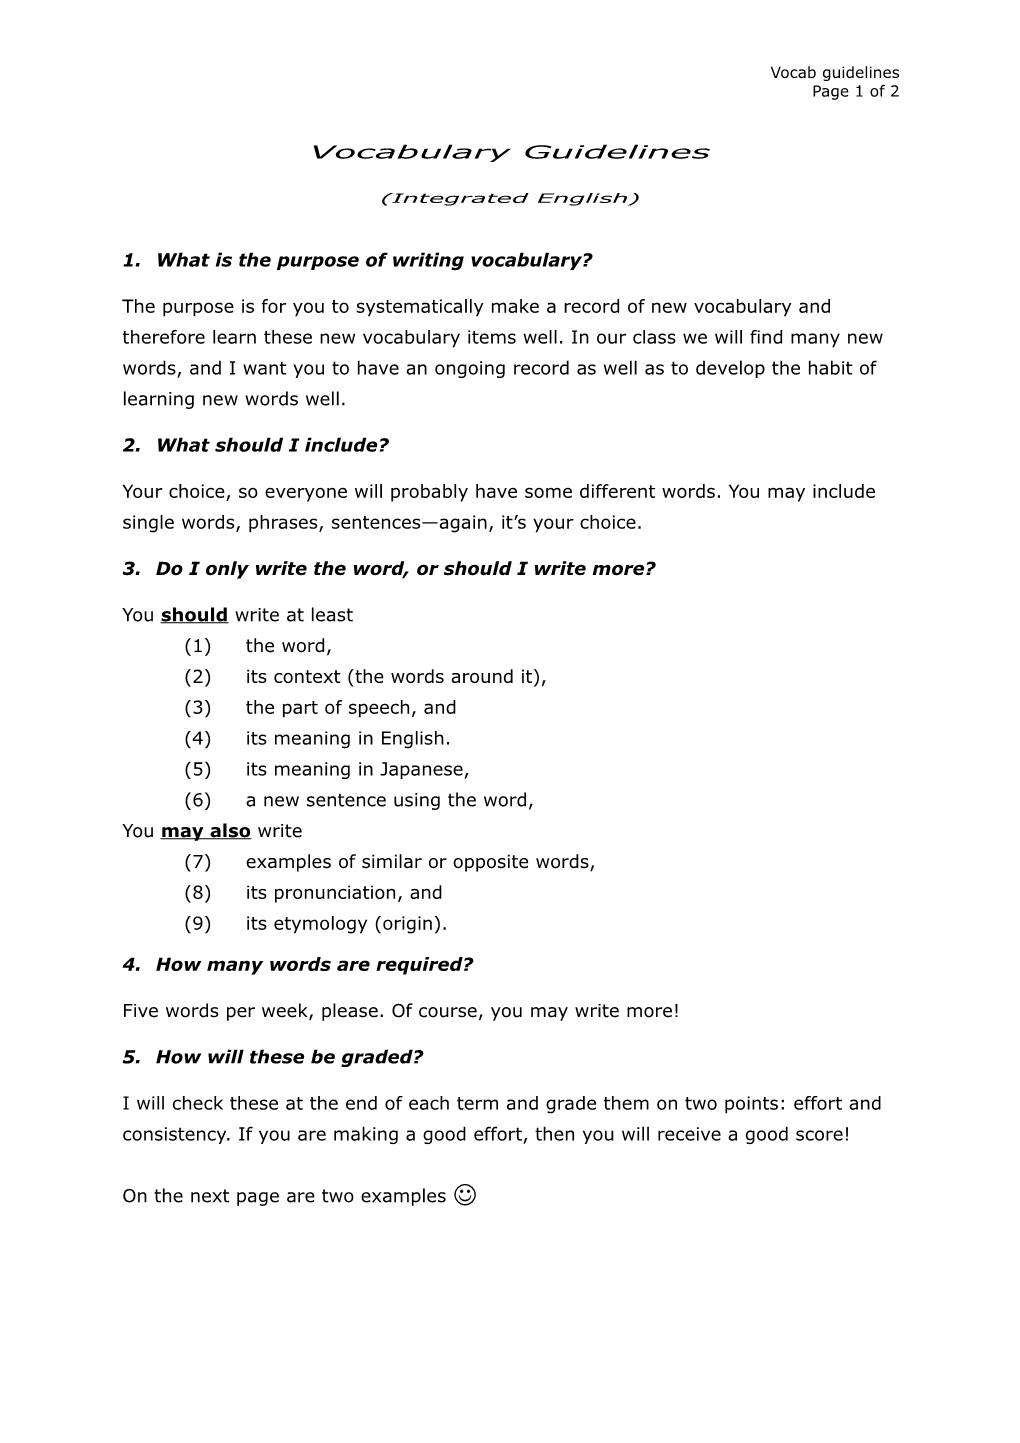 Vocabulary Notebook Guidelines